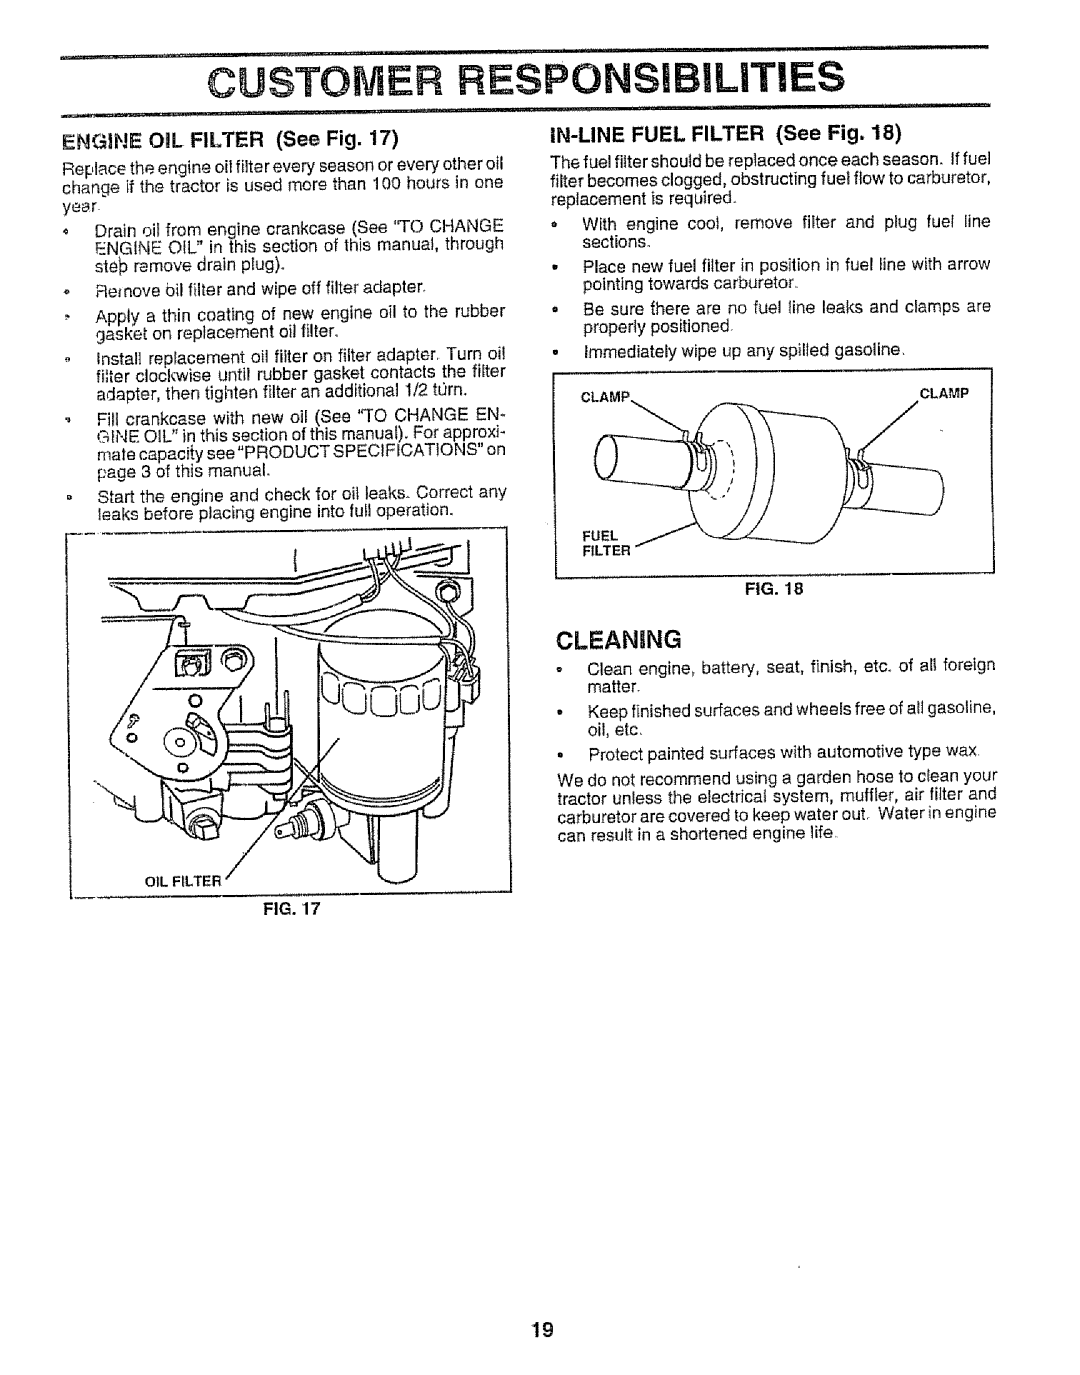 Sears 917.258542 owner manual Cleanrng, ENGIHE OiL FILTER See Fig, IN-LINEFUEL FILTER See Fig 